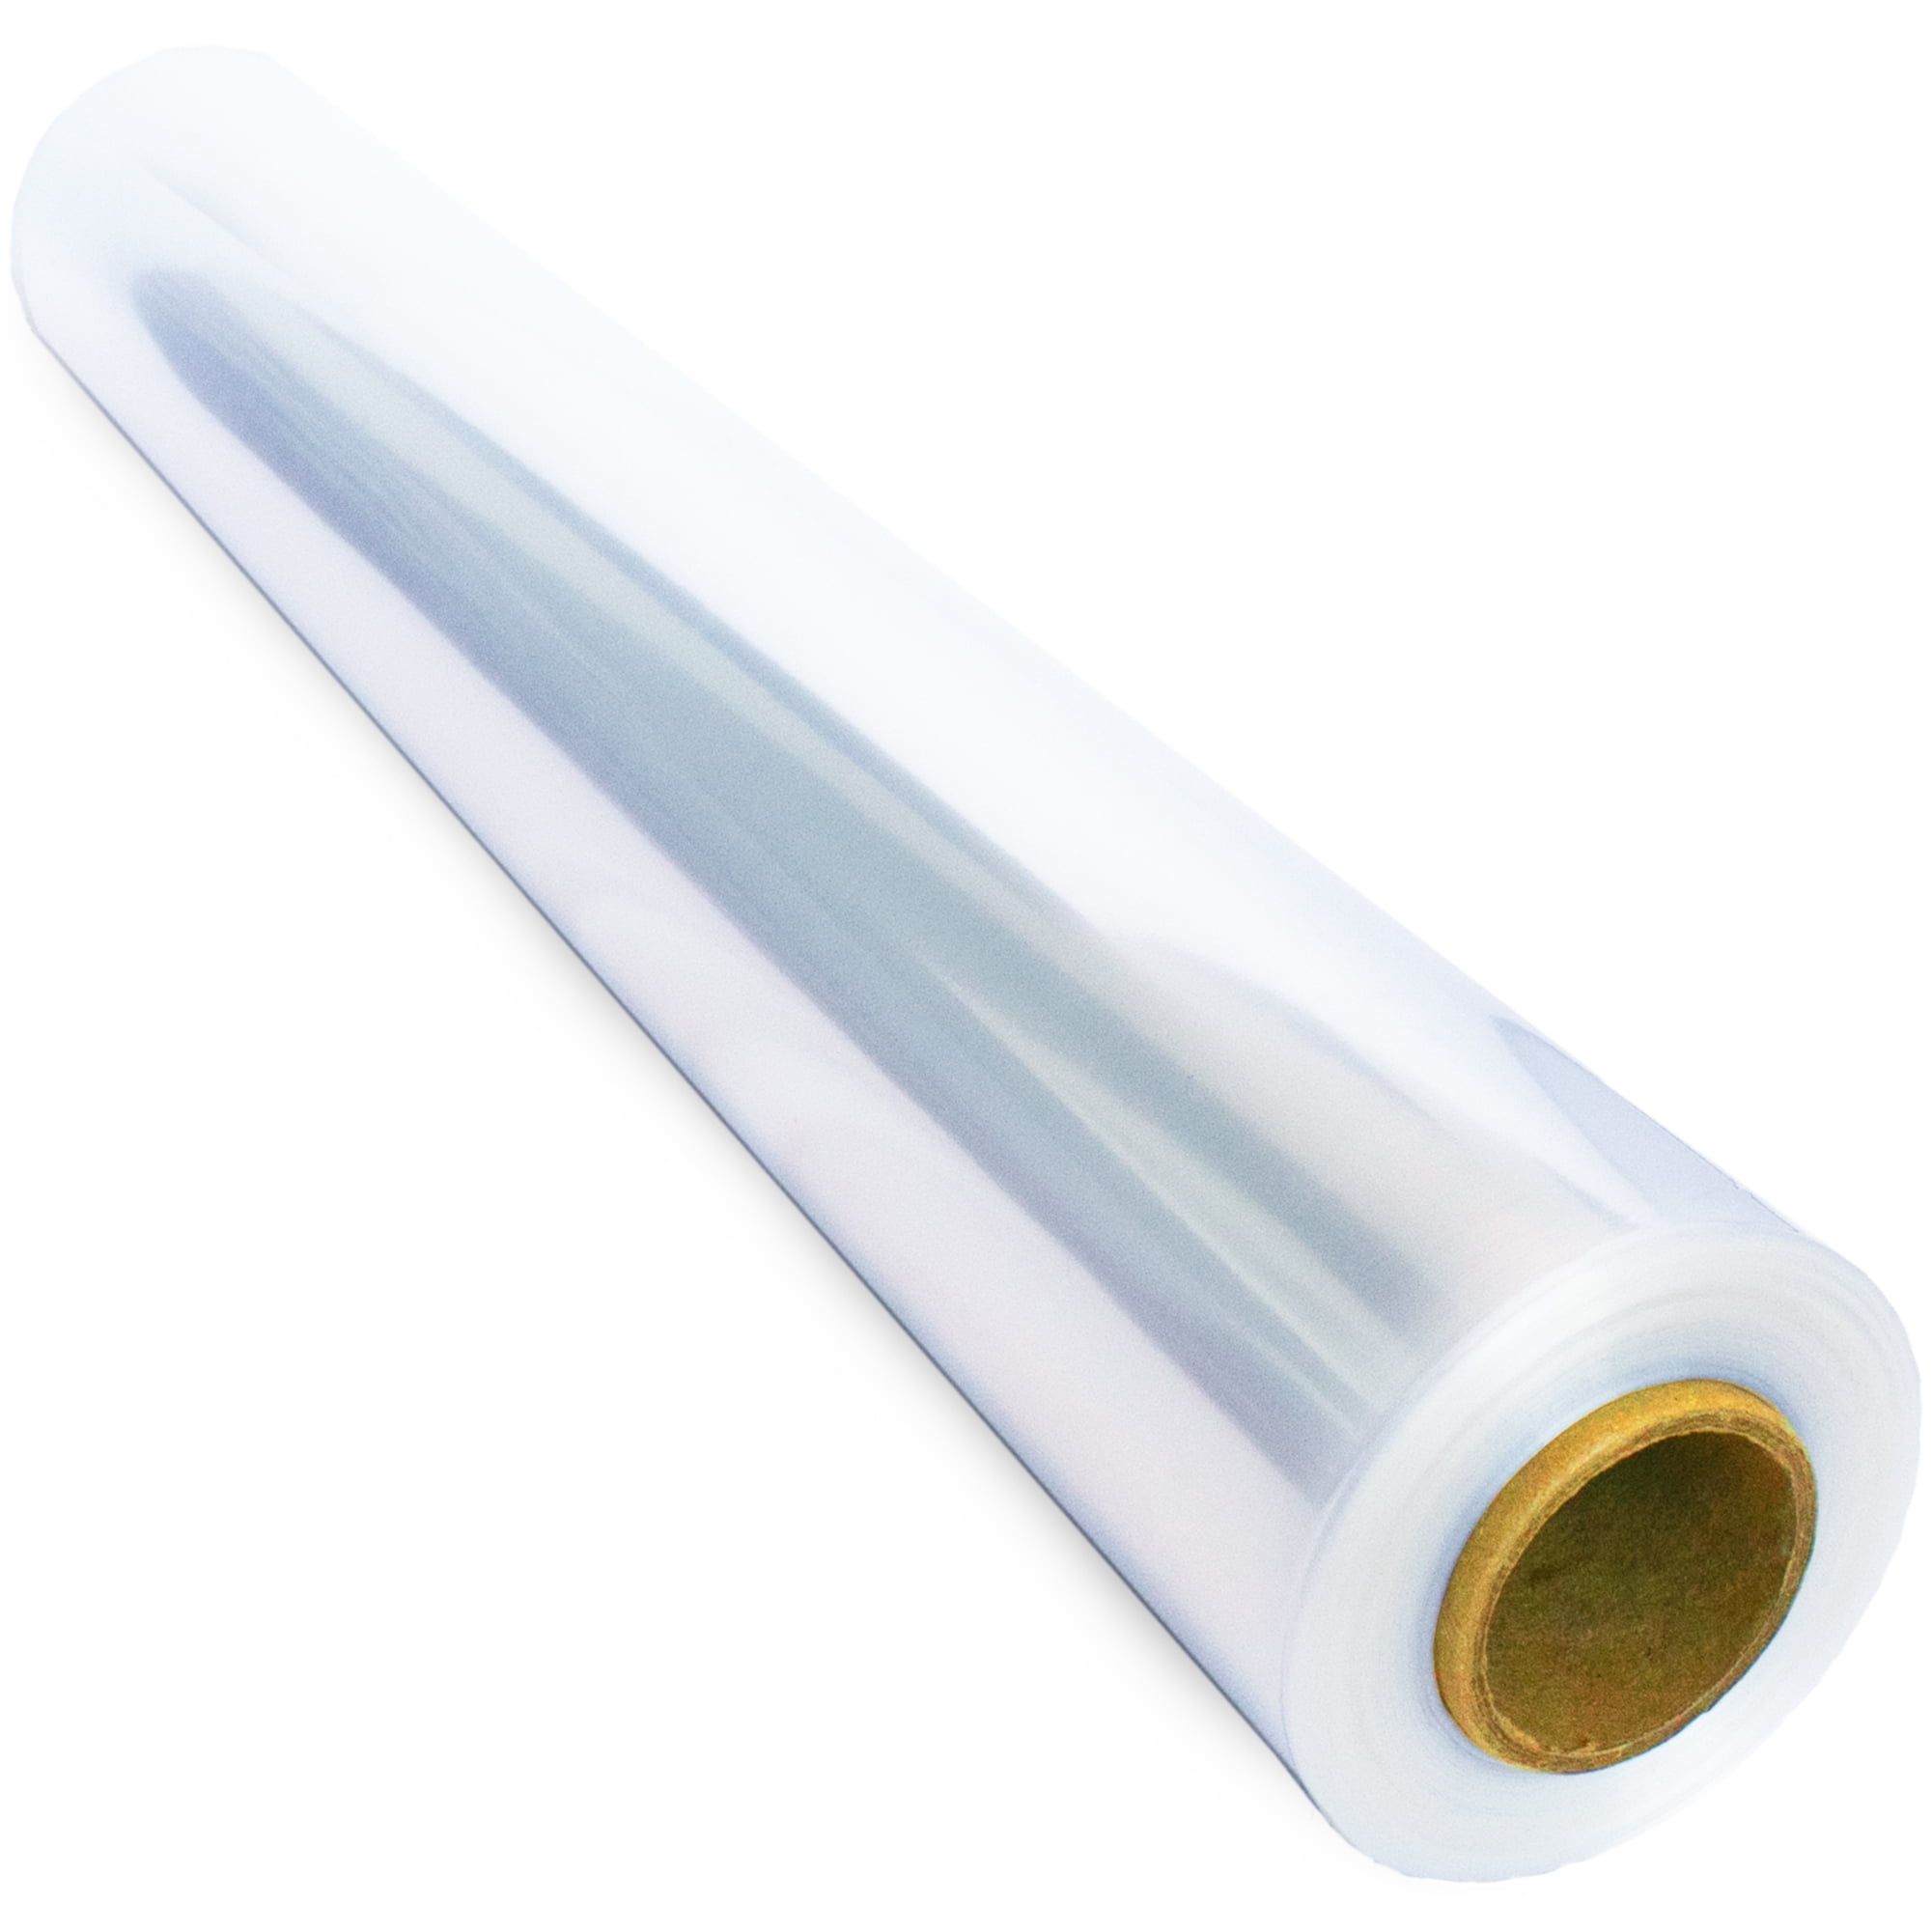  SYOGUA Green Cellophane Wrap Roll, 34 in (W)x100 ft (L